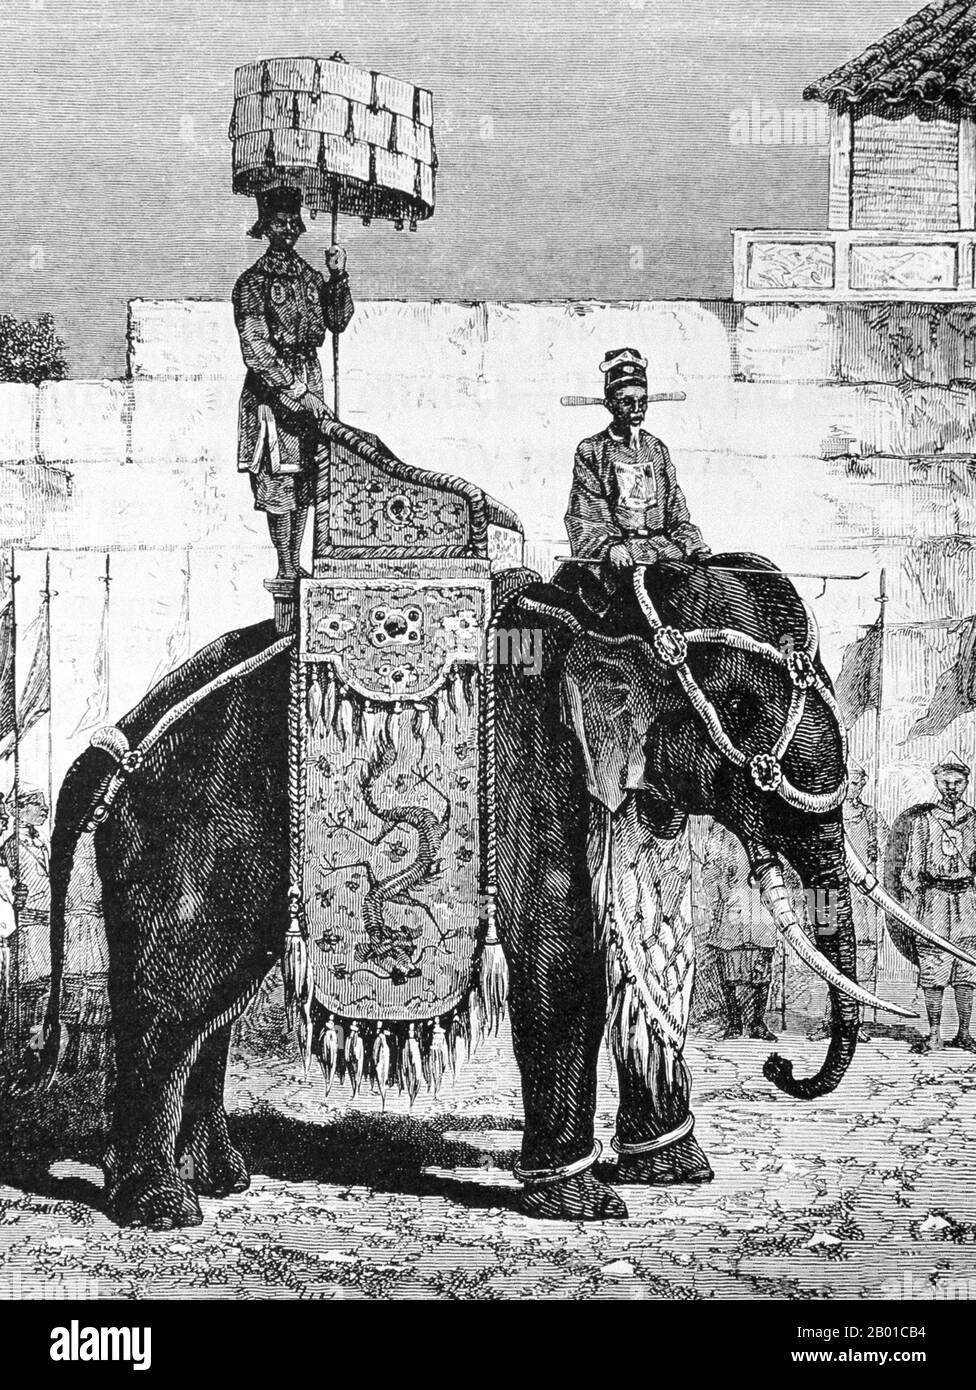 Vietnam: A richly caparisoned elephant of the royal court at Hue. Engraving by Paul Adolphe Kauffmann (8 July 1849 - 20 February 1940), 1878.  Huế originally rose to prominence as the capital of the Nguyễn Lords, a feudal dynasty which dominated much of southern Vietnam from the 17th to the 19th century. In 1775 when Trịnh Sâm captured it, it was known as Phú Xuân. In 1802, Nguyễn Phúc Ánh (later Emperor Gia Long) succeeded in establishing his control over the whole of Vietnam, thereby making Huế the national capital.  Huế was the national capital until 1945. Stock Photo